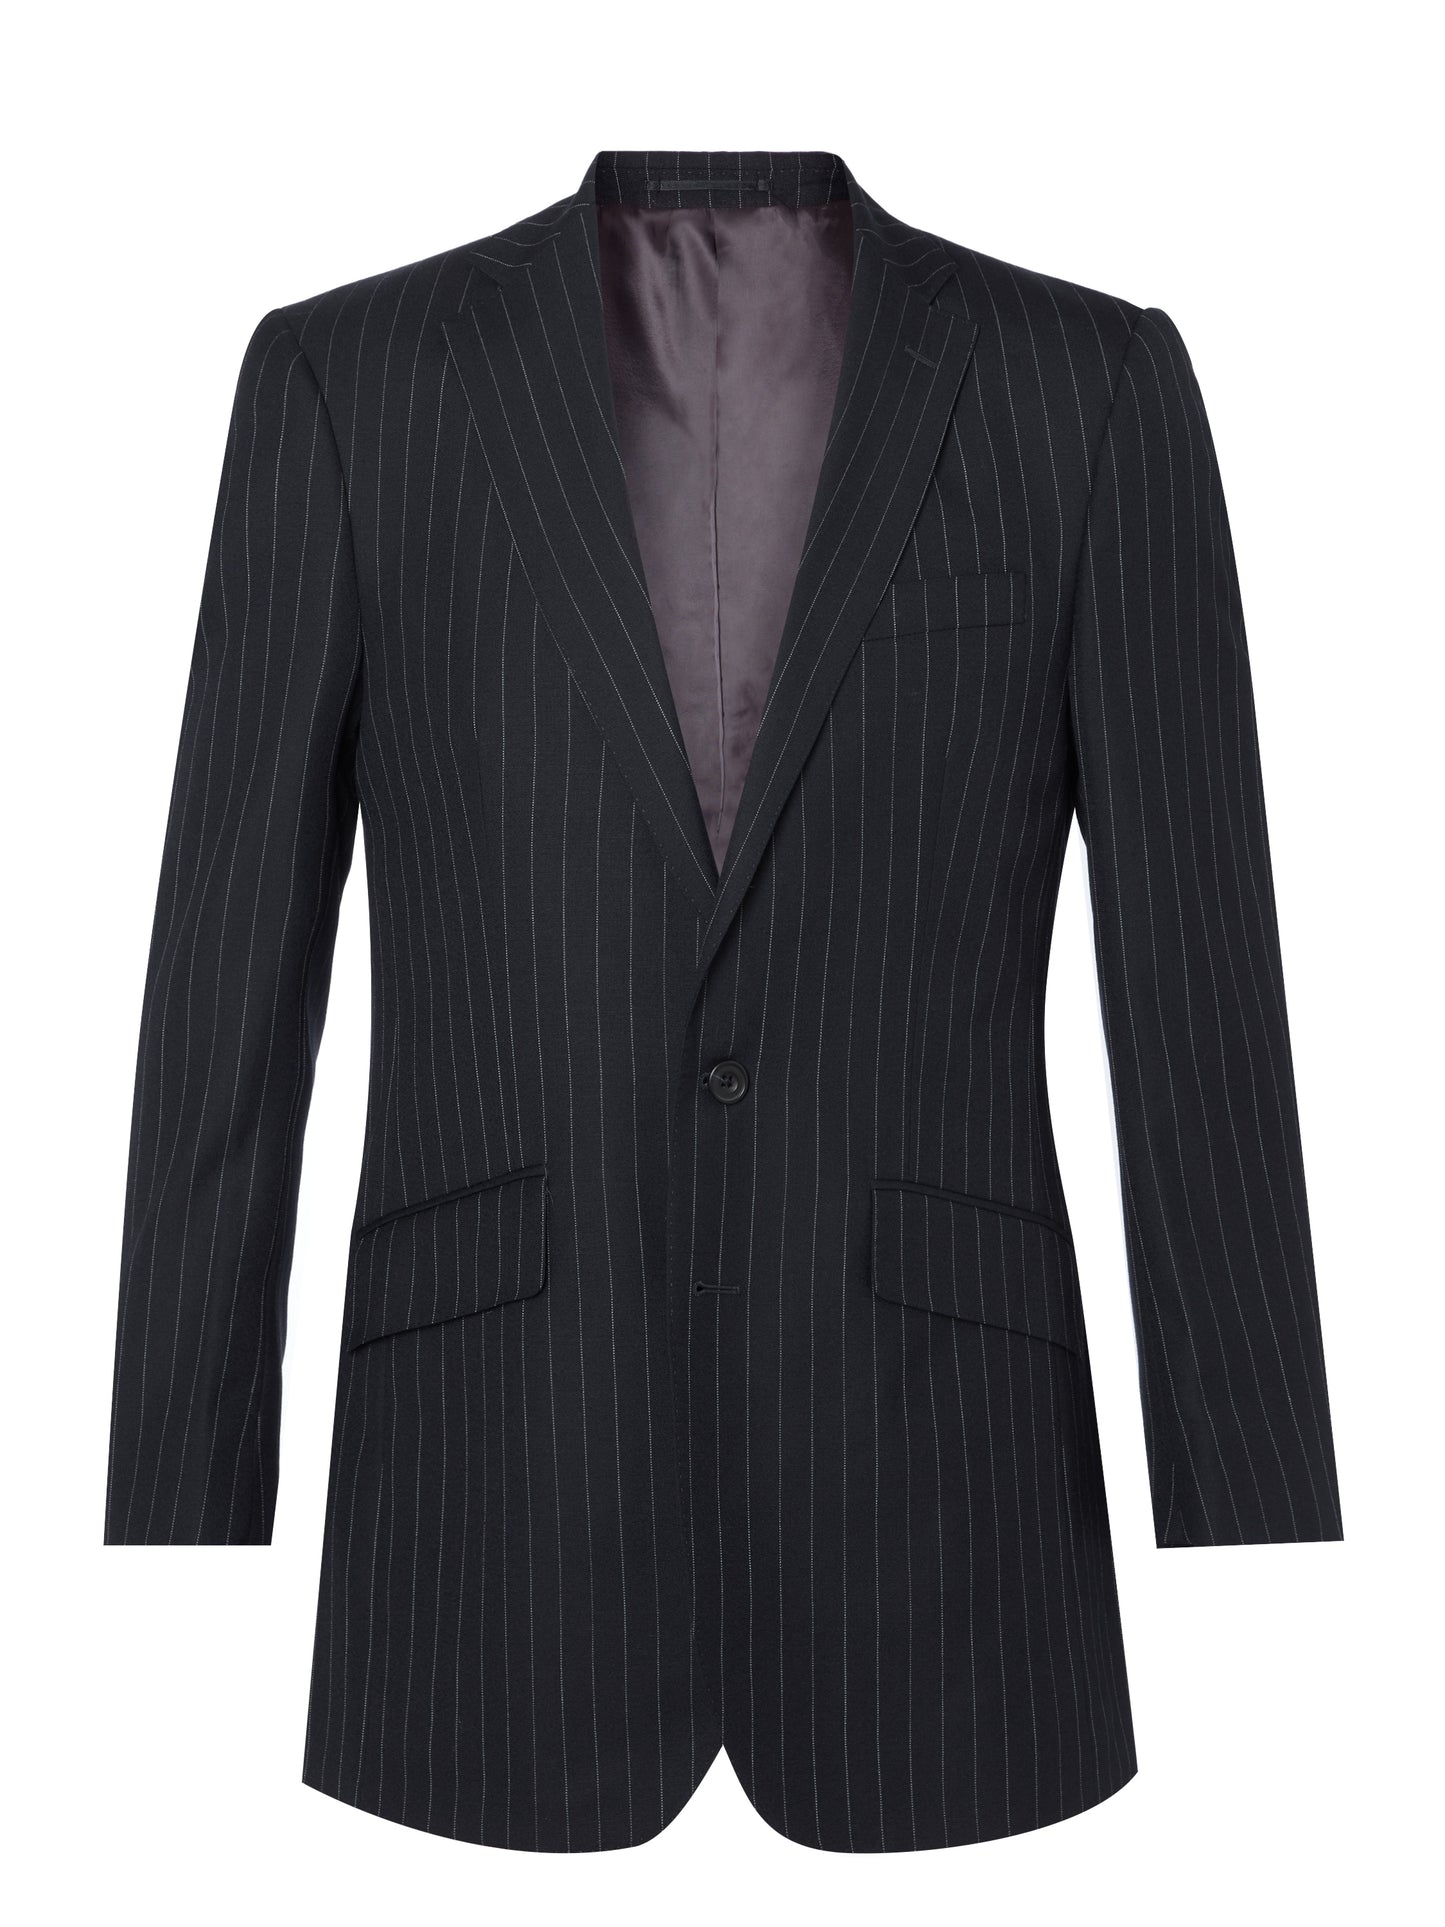 Limited Edition Eaton Suit - Lightweight Grey Pinstripe